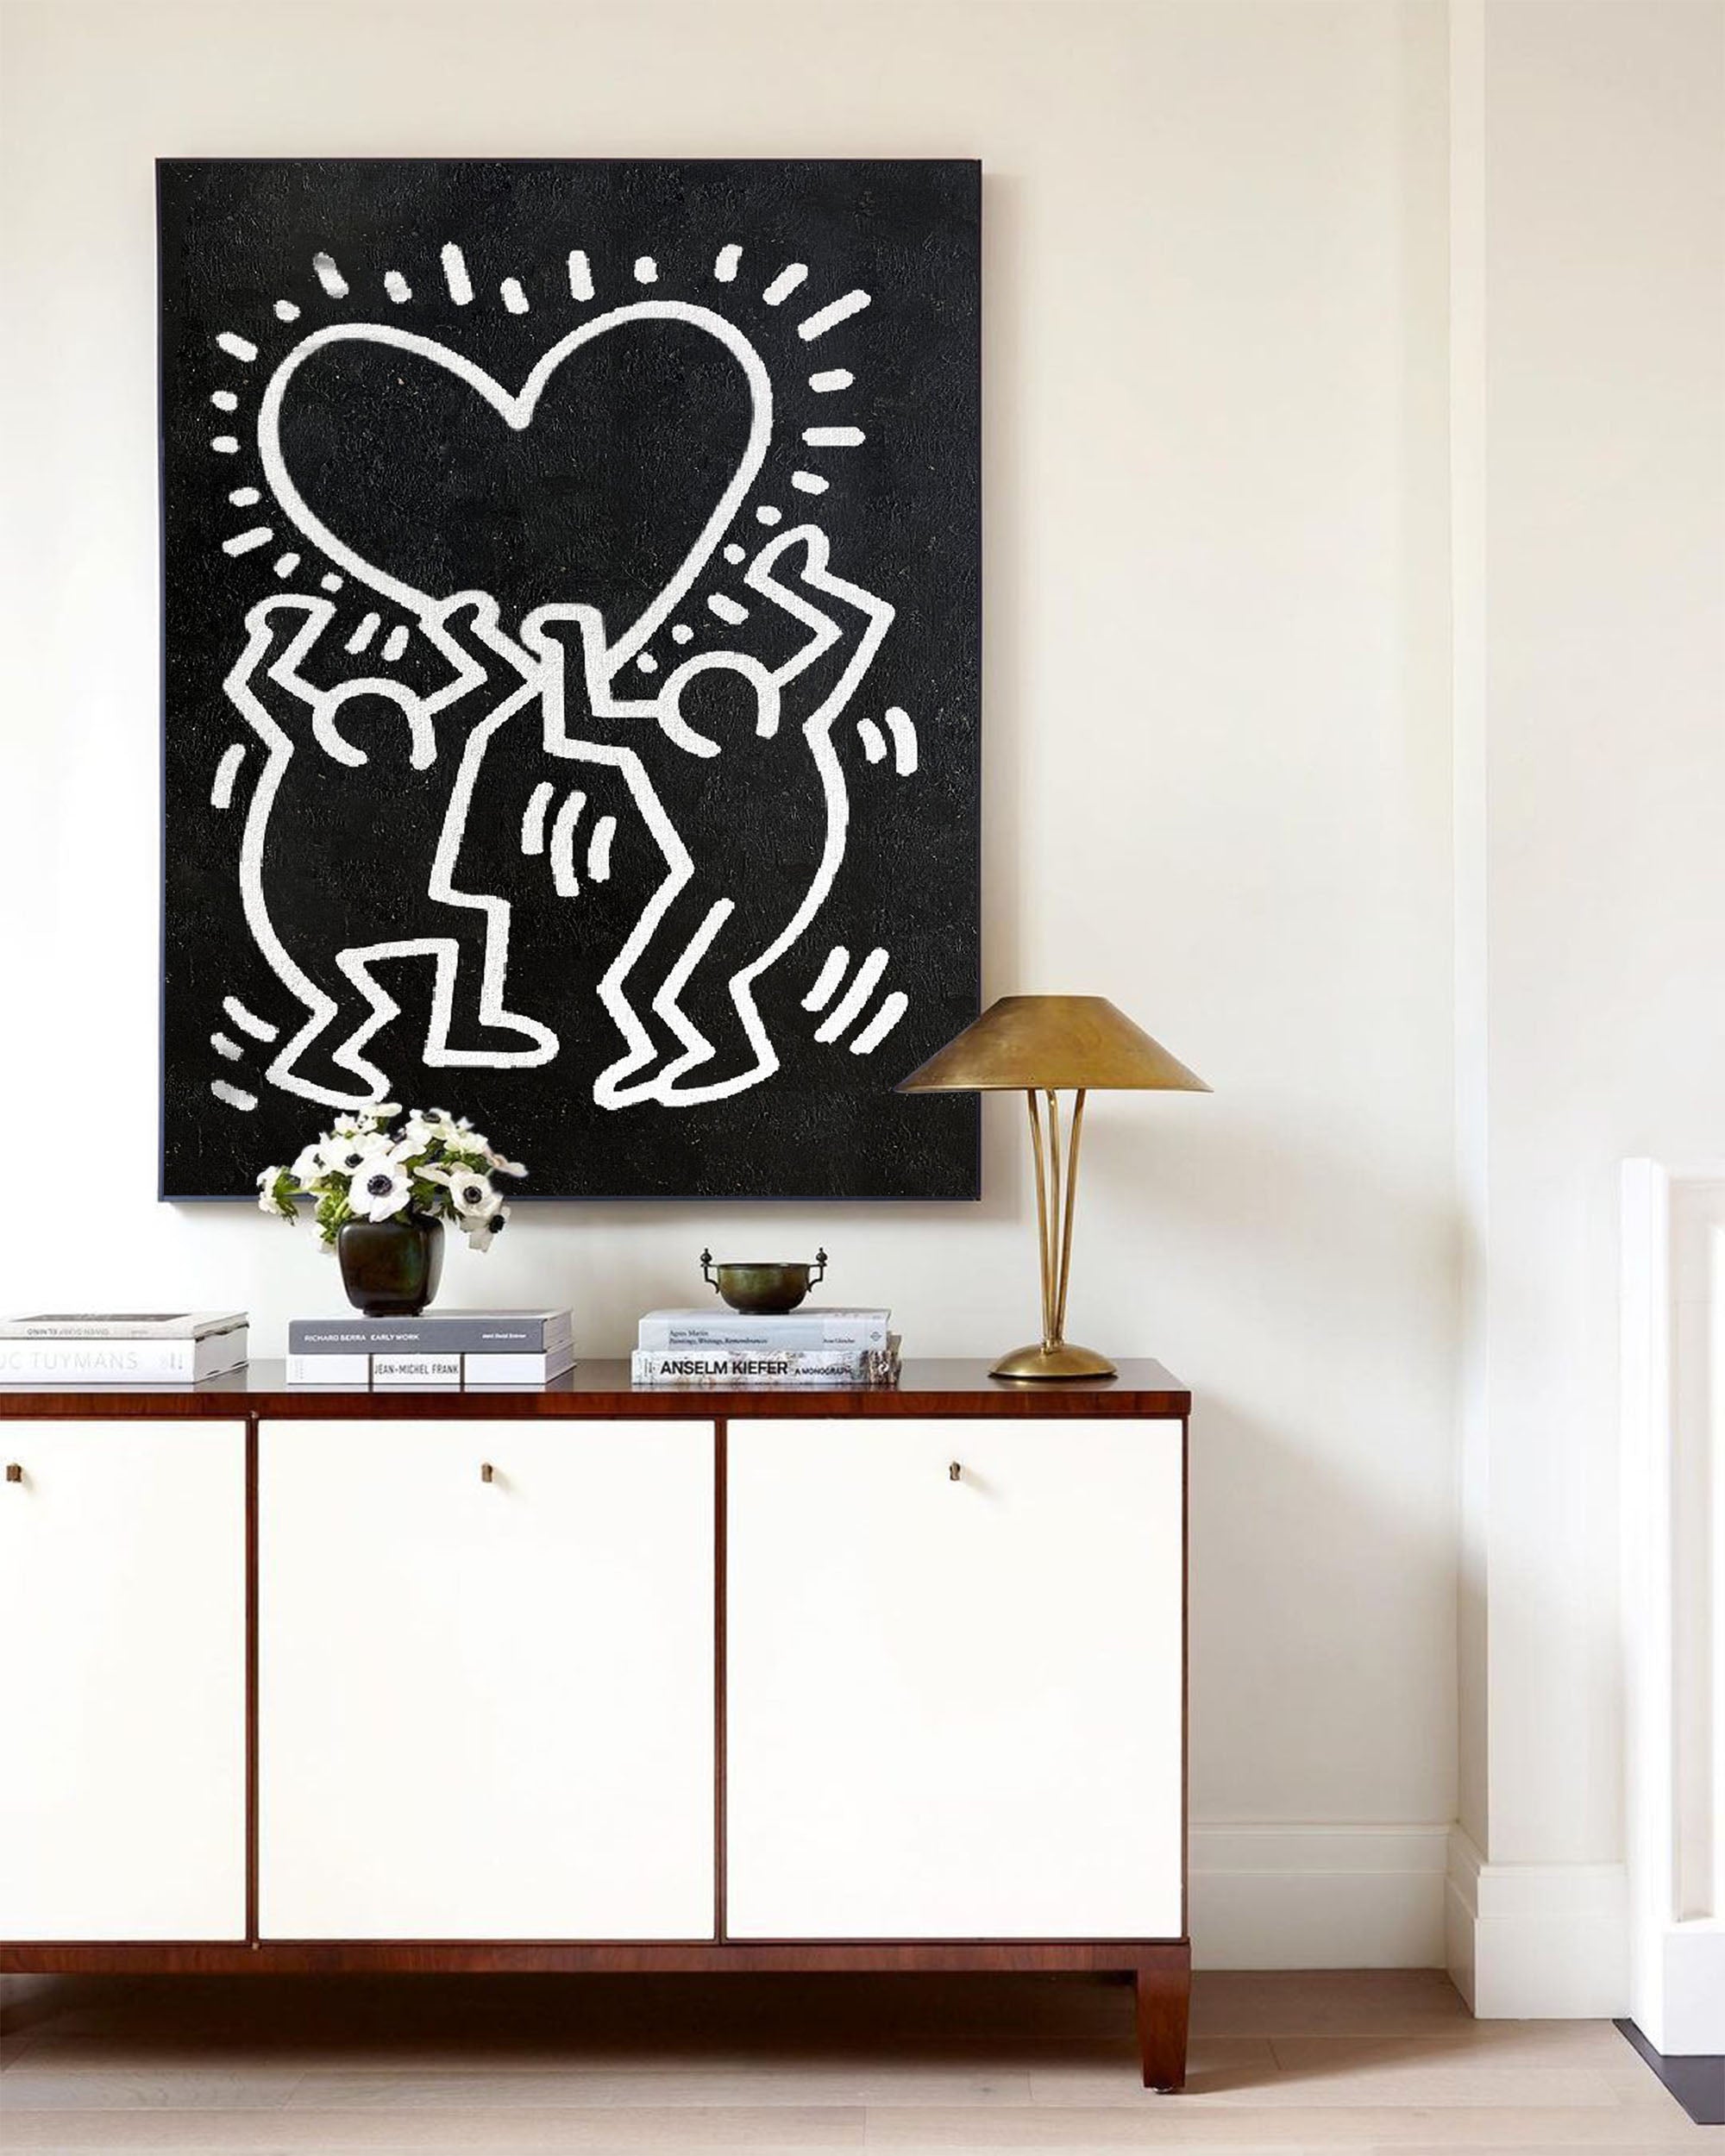 Keith Haring Style Painting #KS008